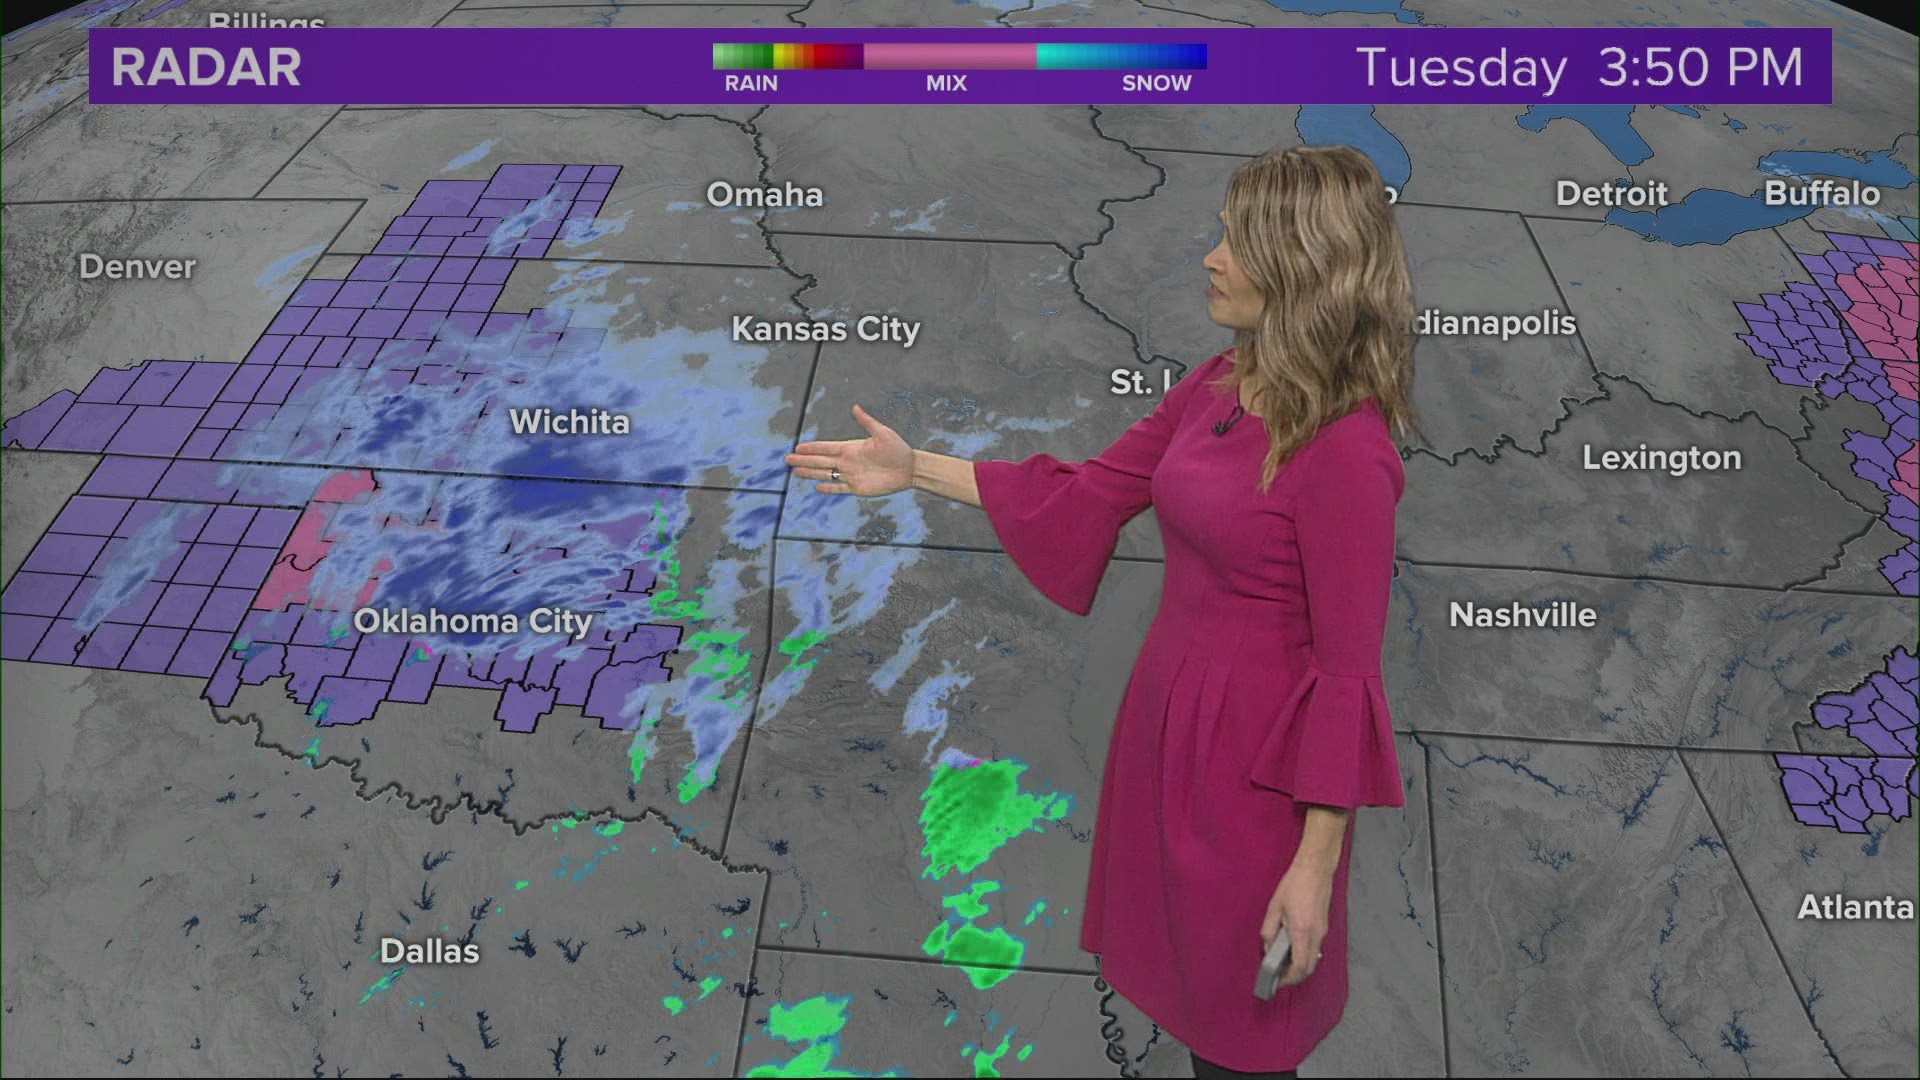 Angela is tracking snow chances in the Wednesday forecast.